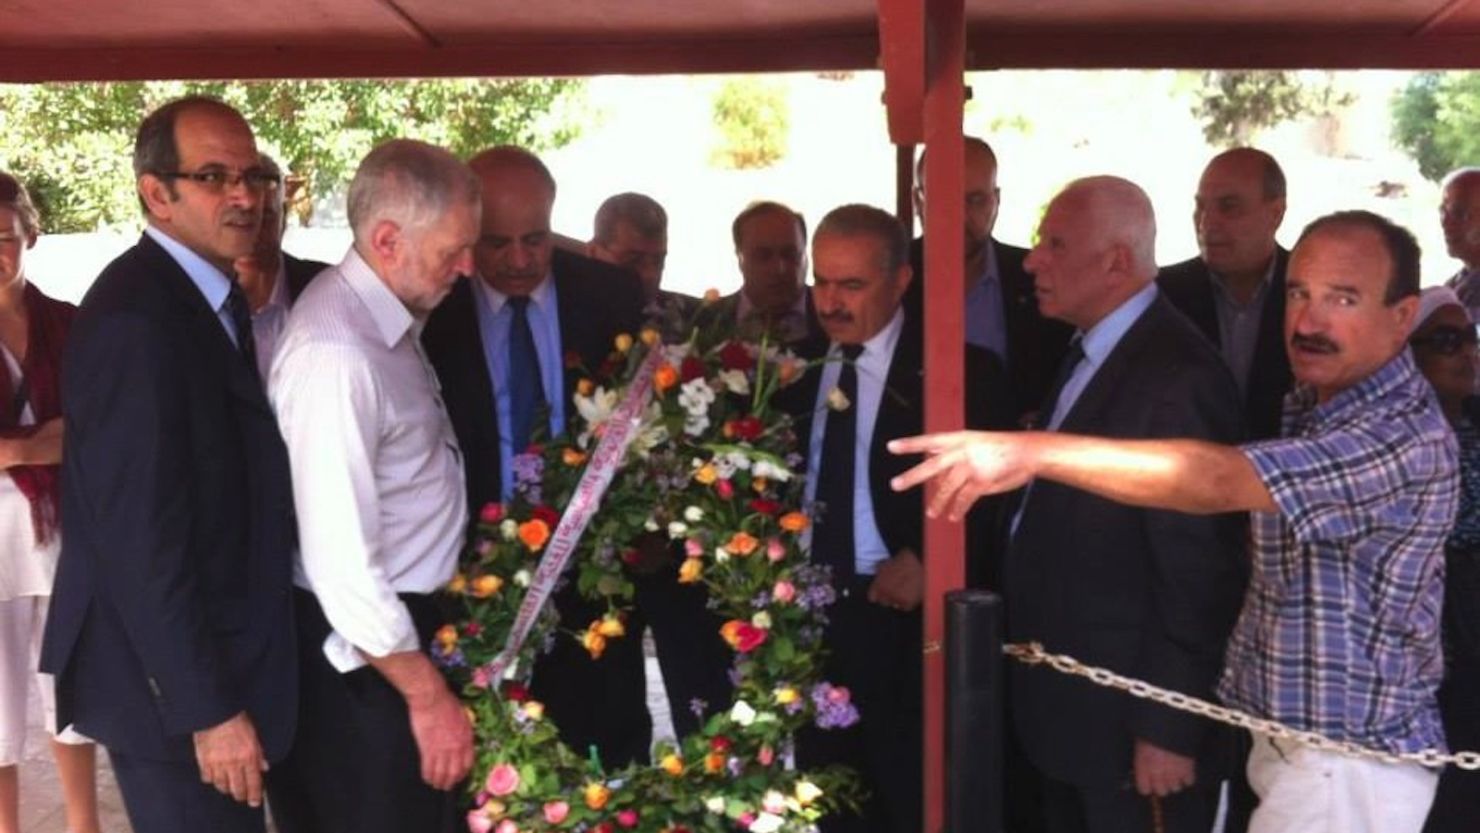 UK Labour Party Leader Jeremy Corbyn takes part in a wreath-laying ceremony at a cemetery in Tunisia, where members of Black September are buried.